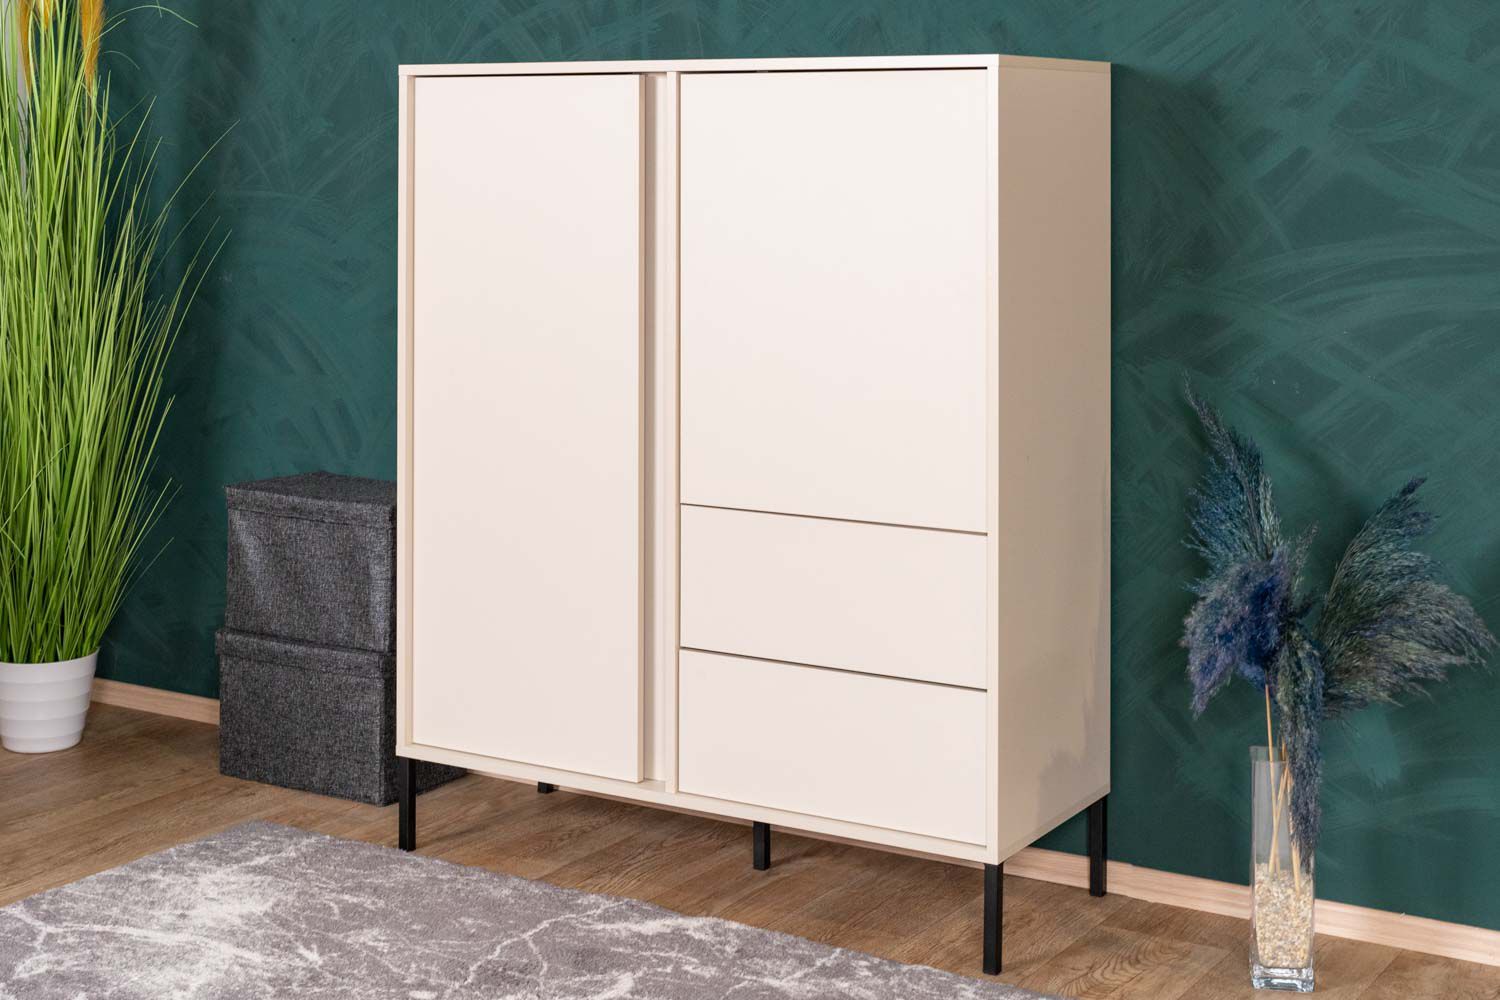 High chest of drawers with five compartments Zaghouan 04, Color: Beige - Dimensions: 123.5 x 103 x 39.5 cm (H x W x D)